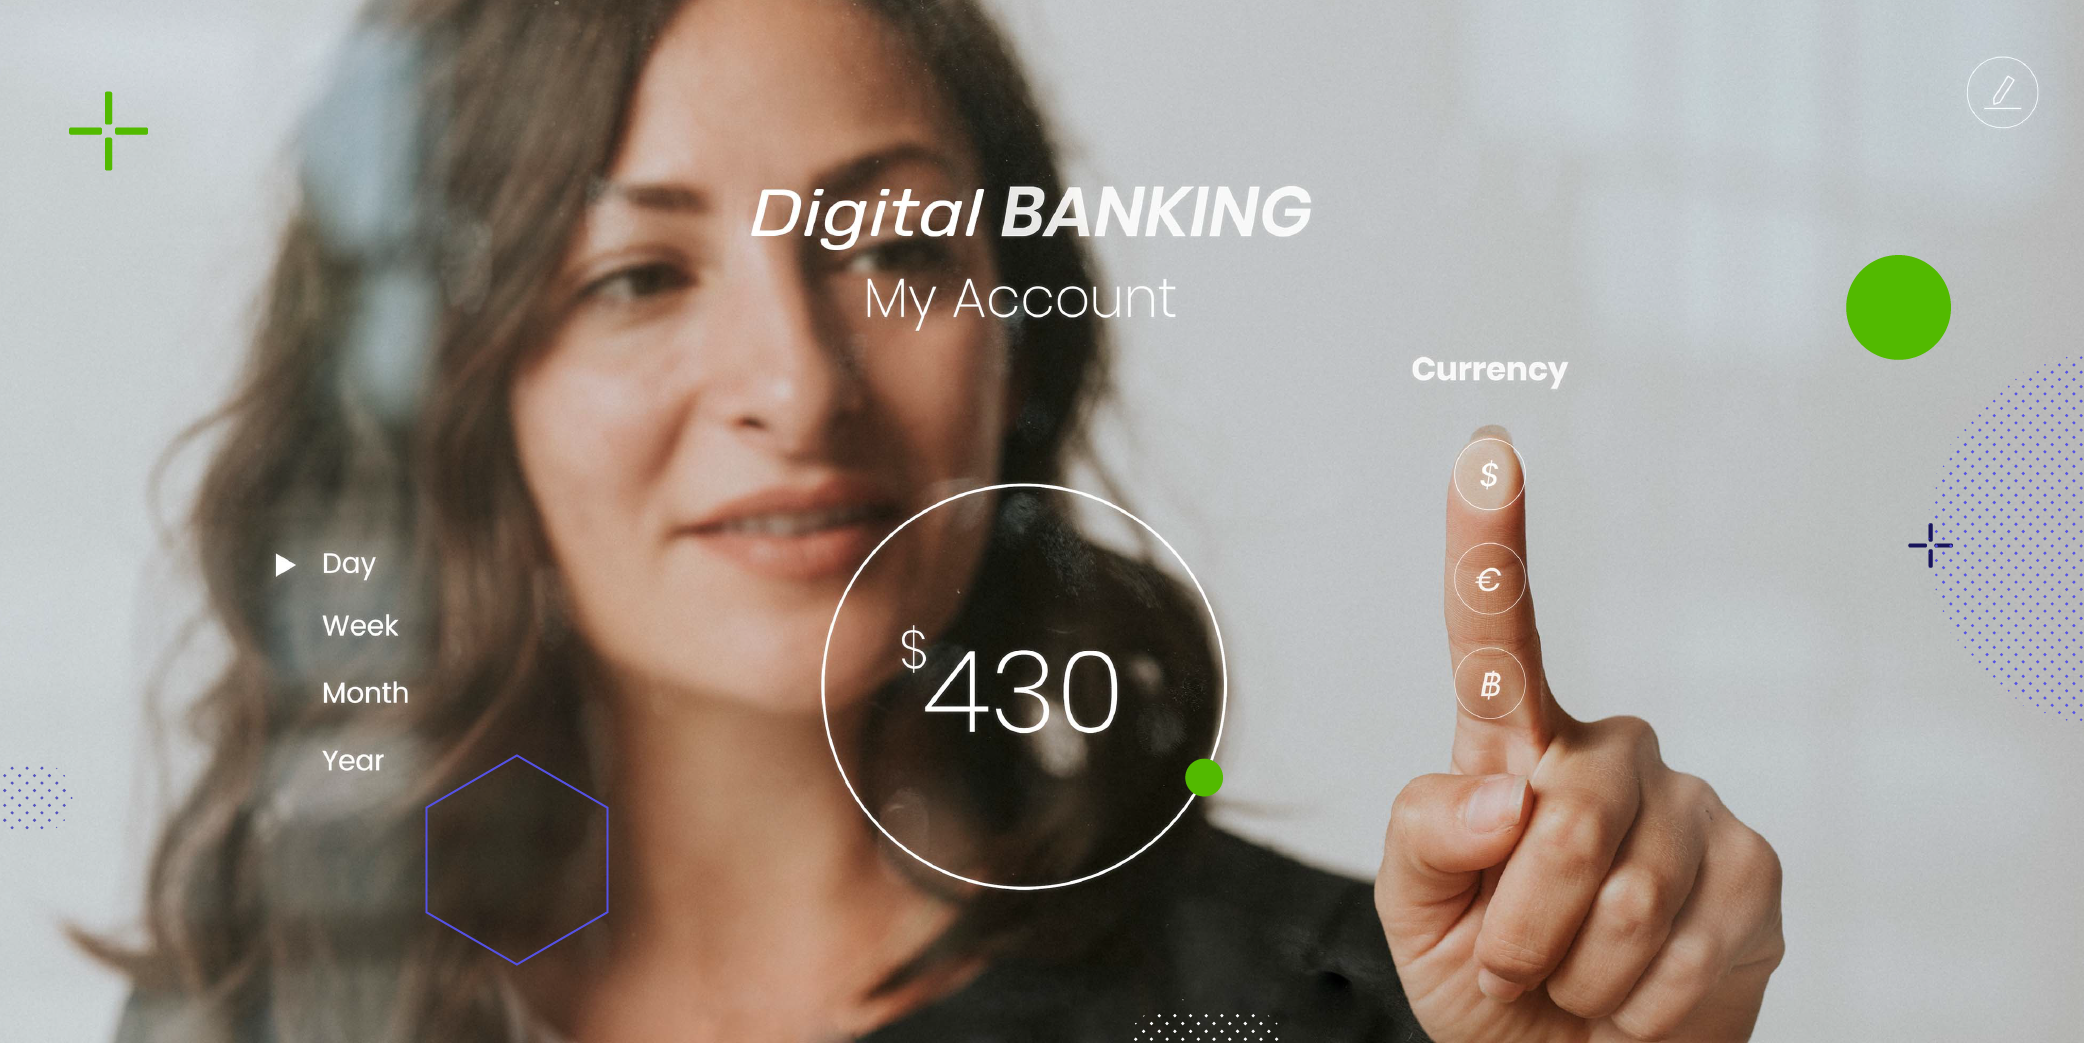 Digital Banking Transformation: what's coming